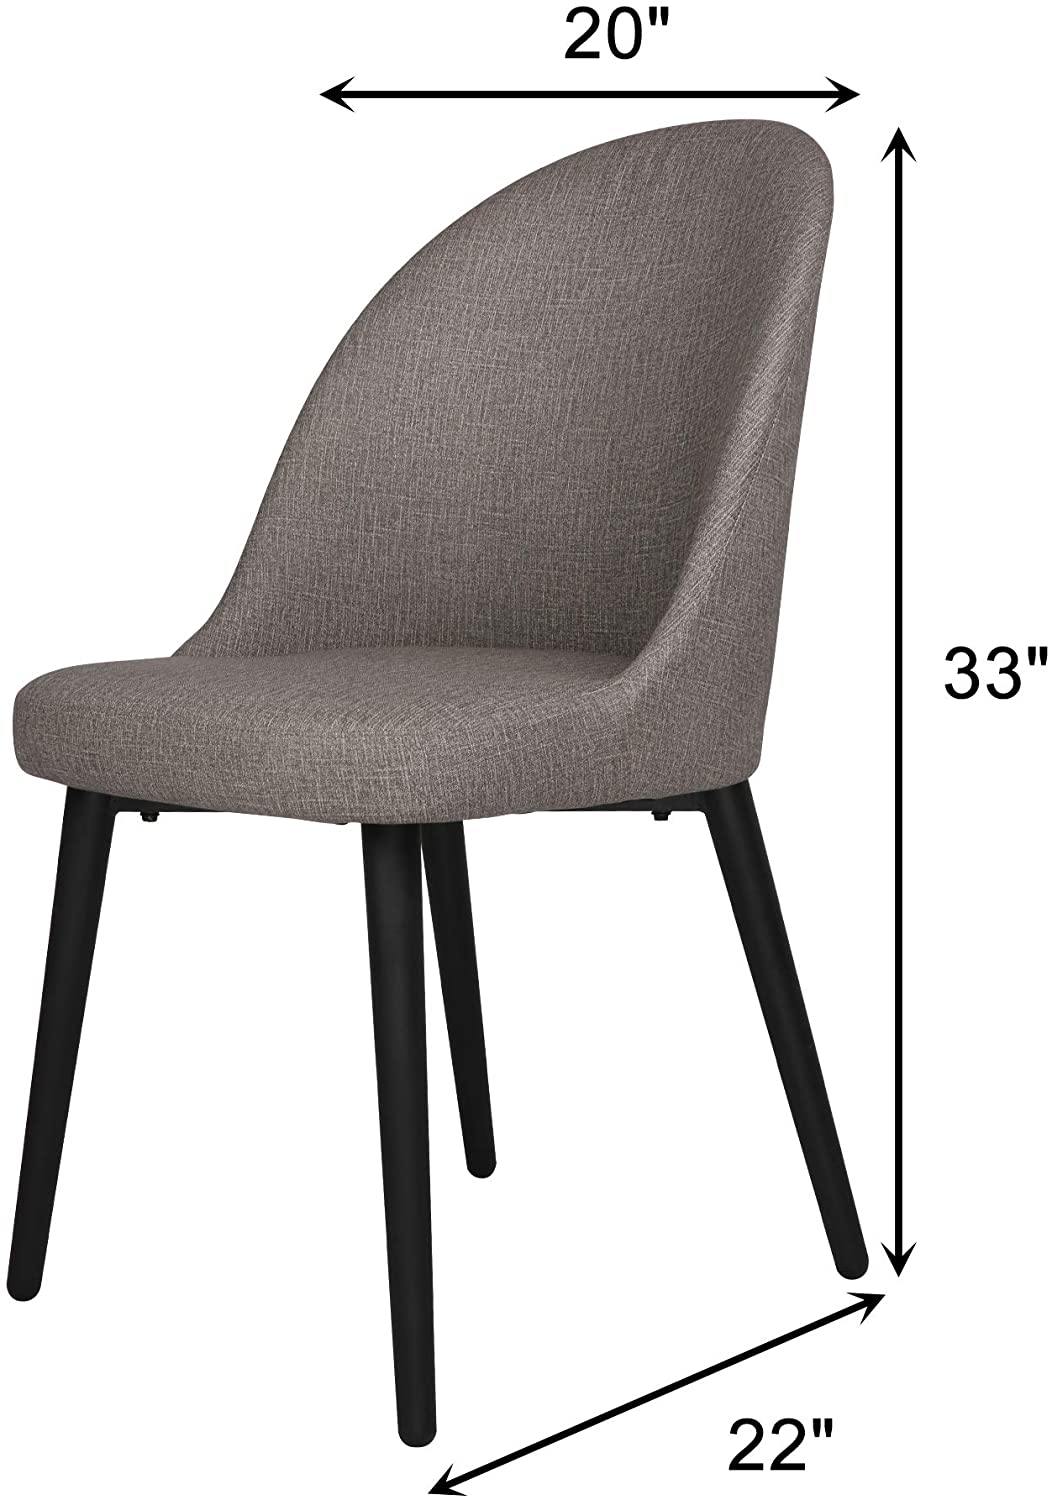 Classic Dining Chair Set of 2, Modern Style Family Leisure Chair with Stainless Steel Legs, PU Leather Mid Back Side Chair, Grey - Bosonshop